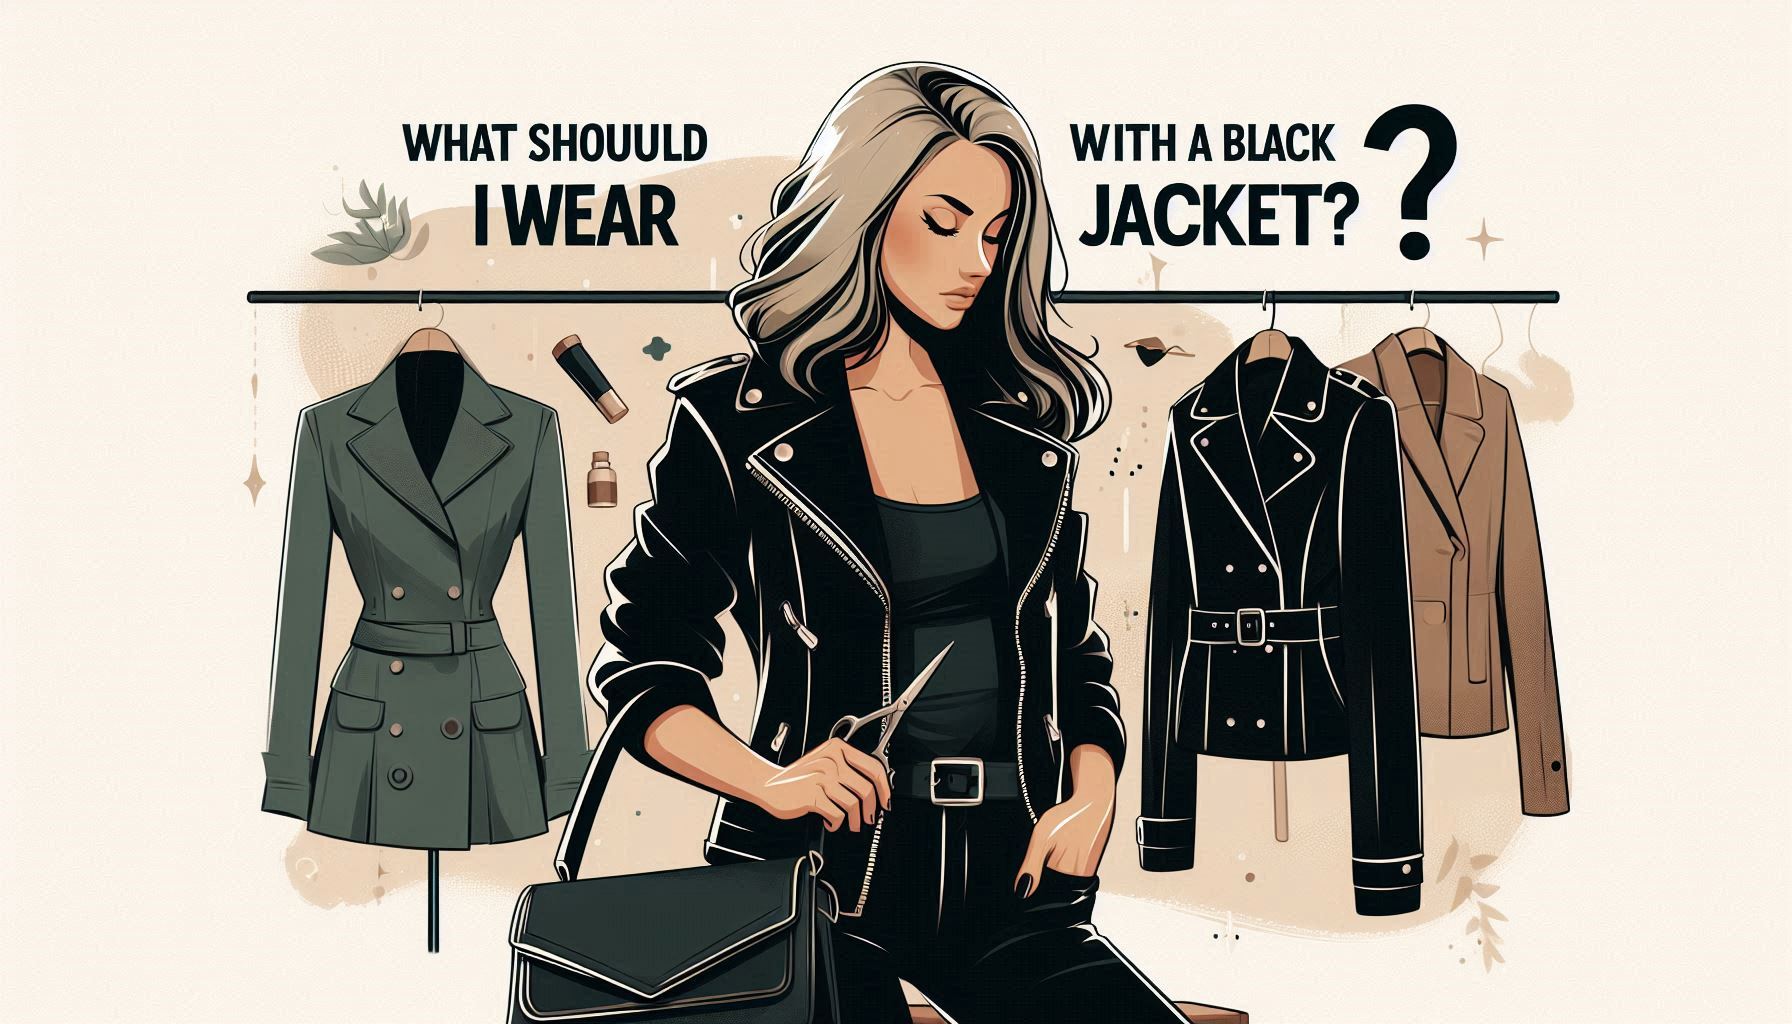 What Should I Wear With A Black Jacket?